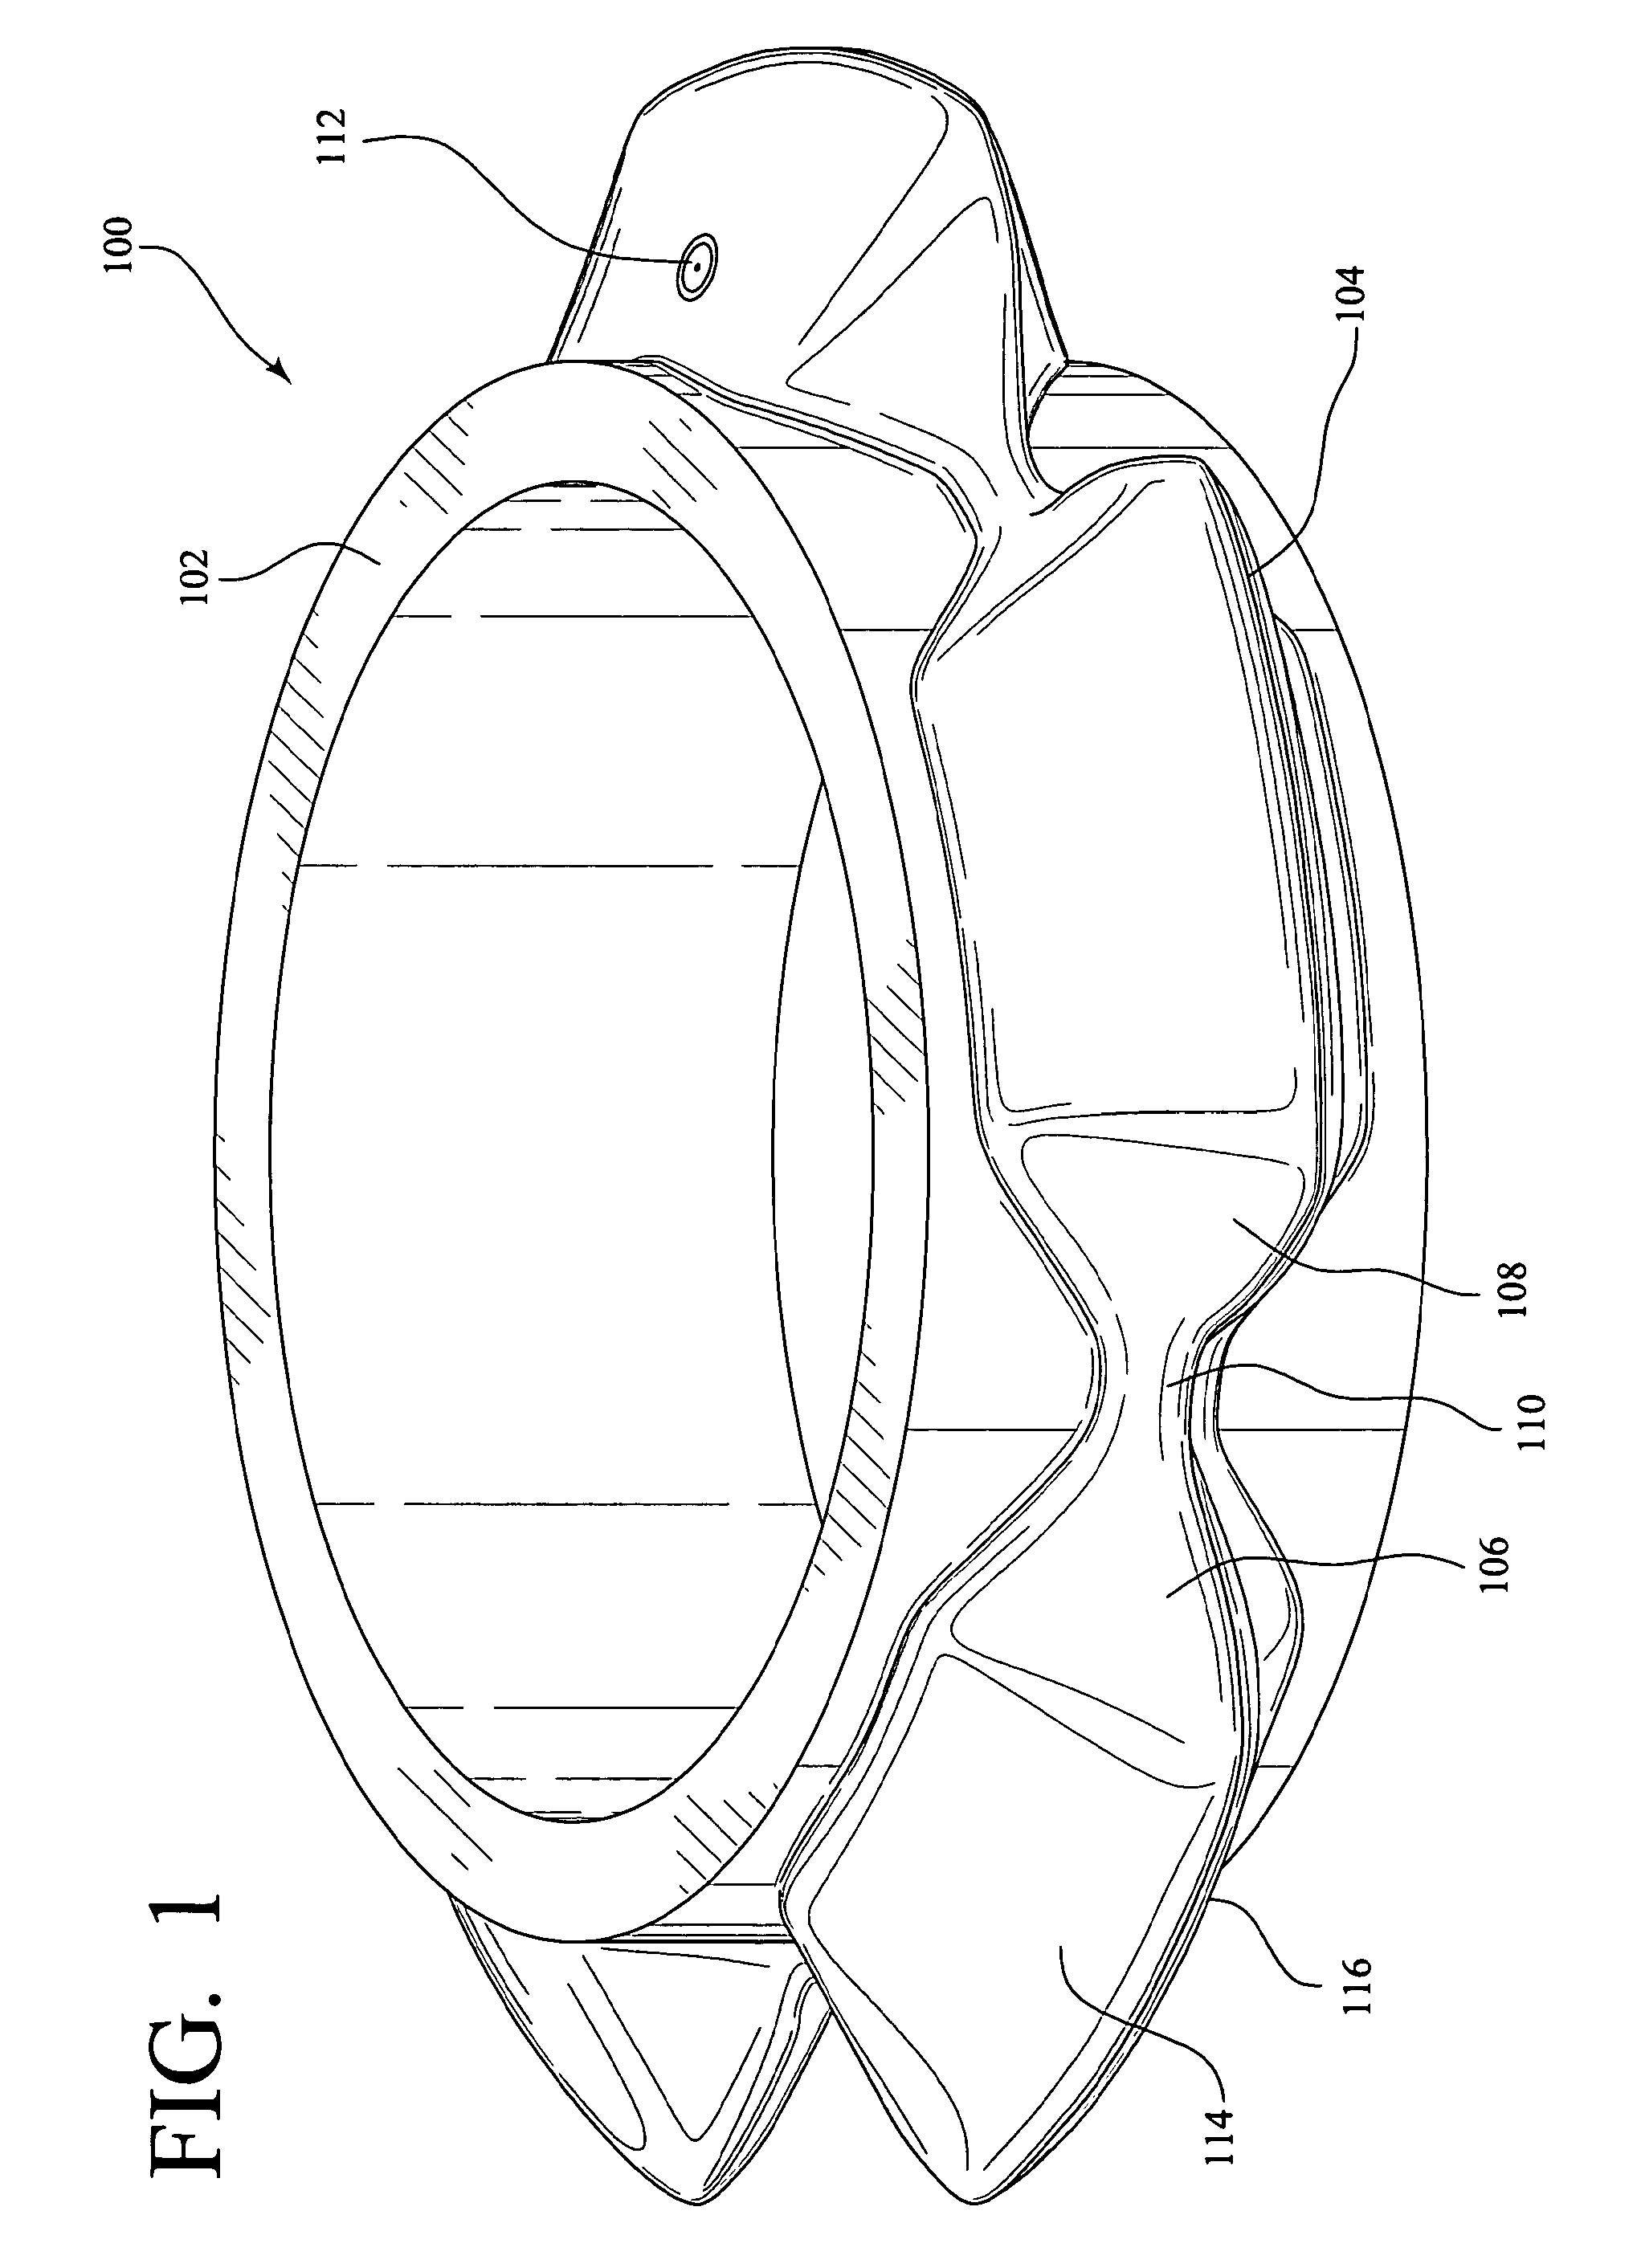 Soil conditioning device